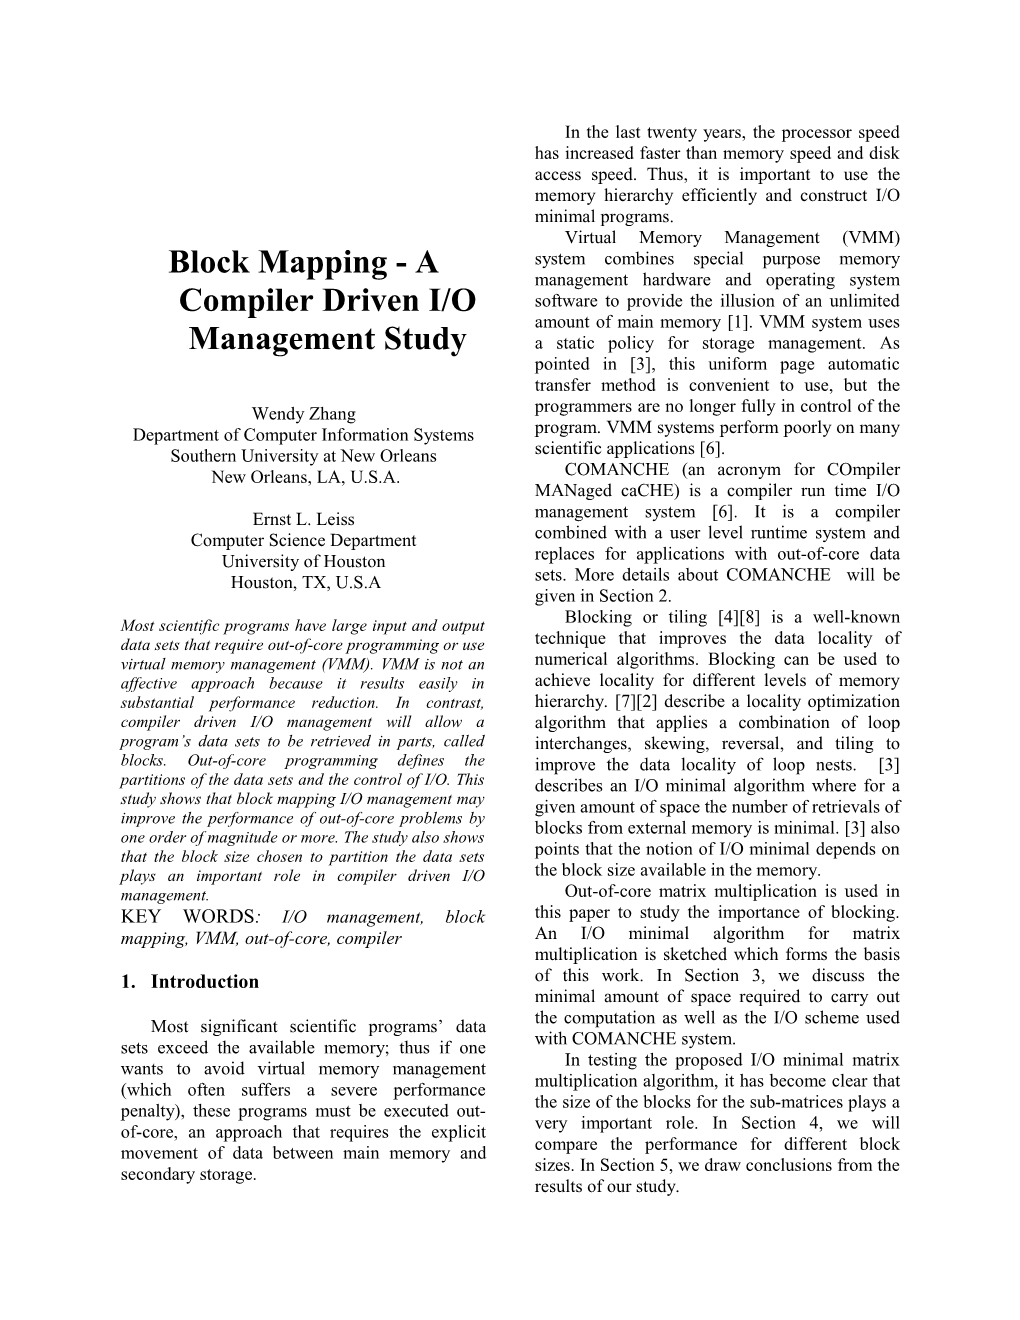 Block Mapping - a Compiler Driven I/O Management Study